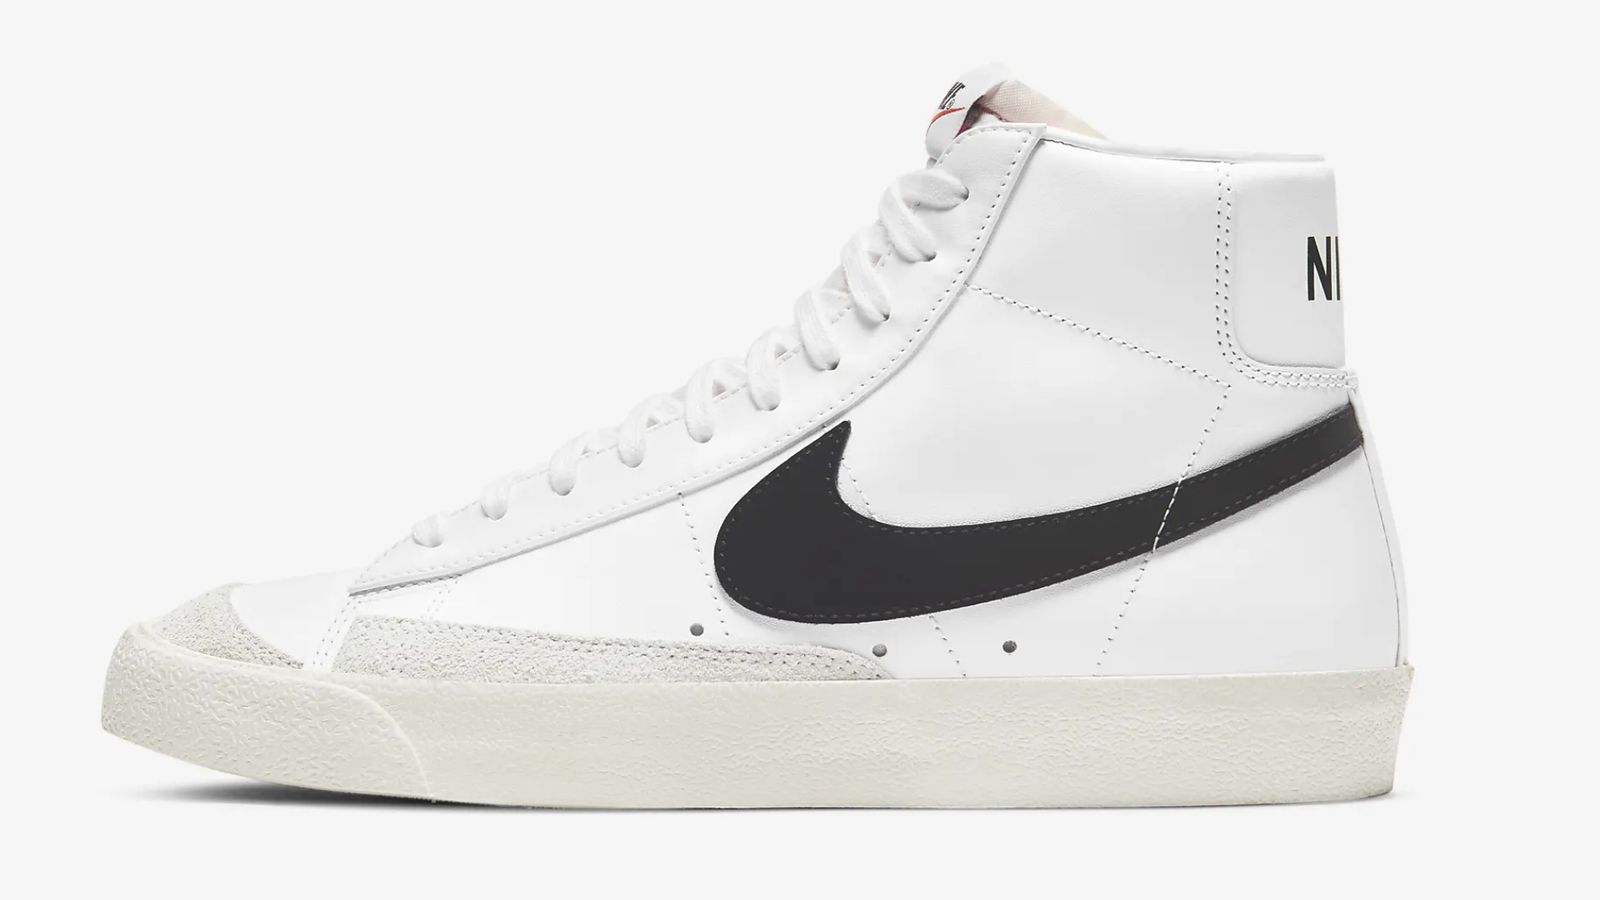 Nike Blazer '77 product image of a white leather high-top with a black Swoosh and a light grey mudguard and sole.